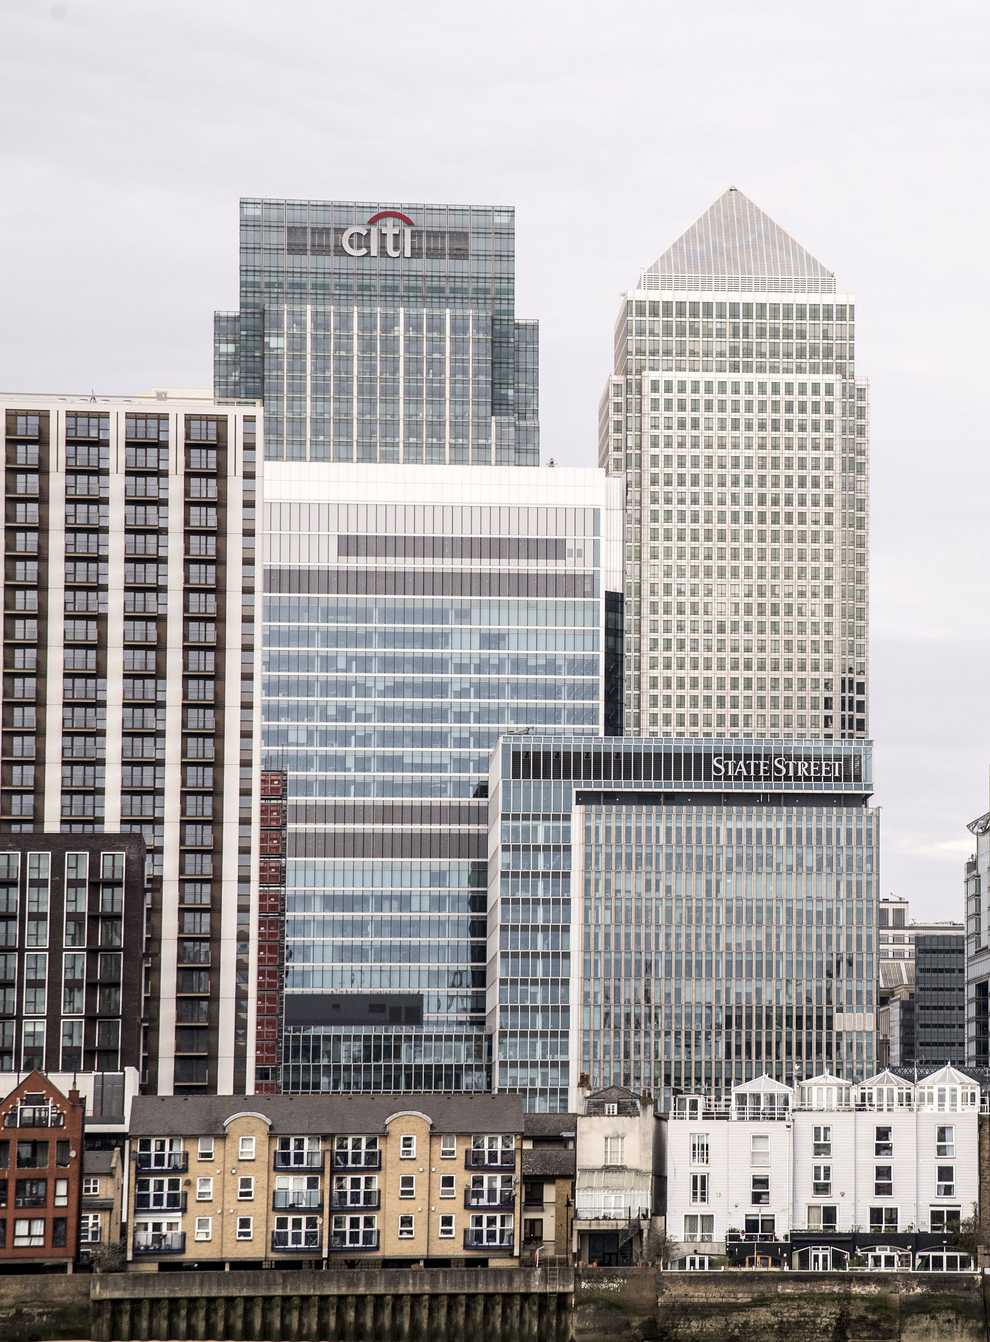 Shares of Britain’s major banks have received a boost after the autumn budget confirmed it will slash its tax surcharge on the sector to 3% from 8% (Ian West/PA)